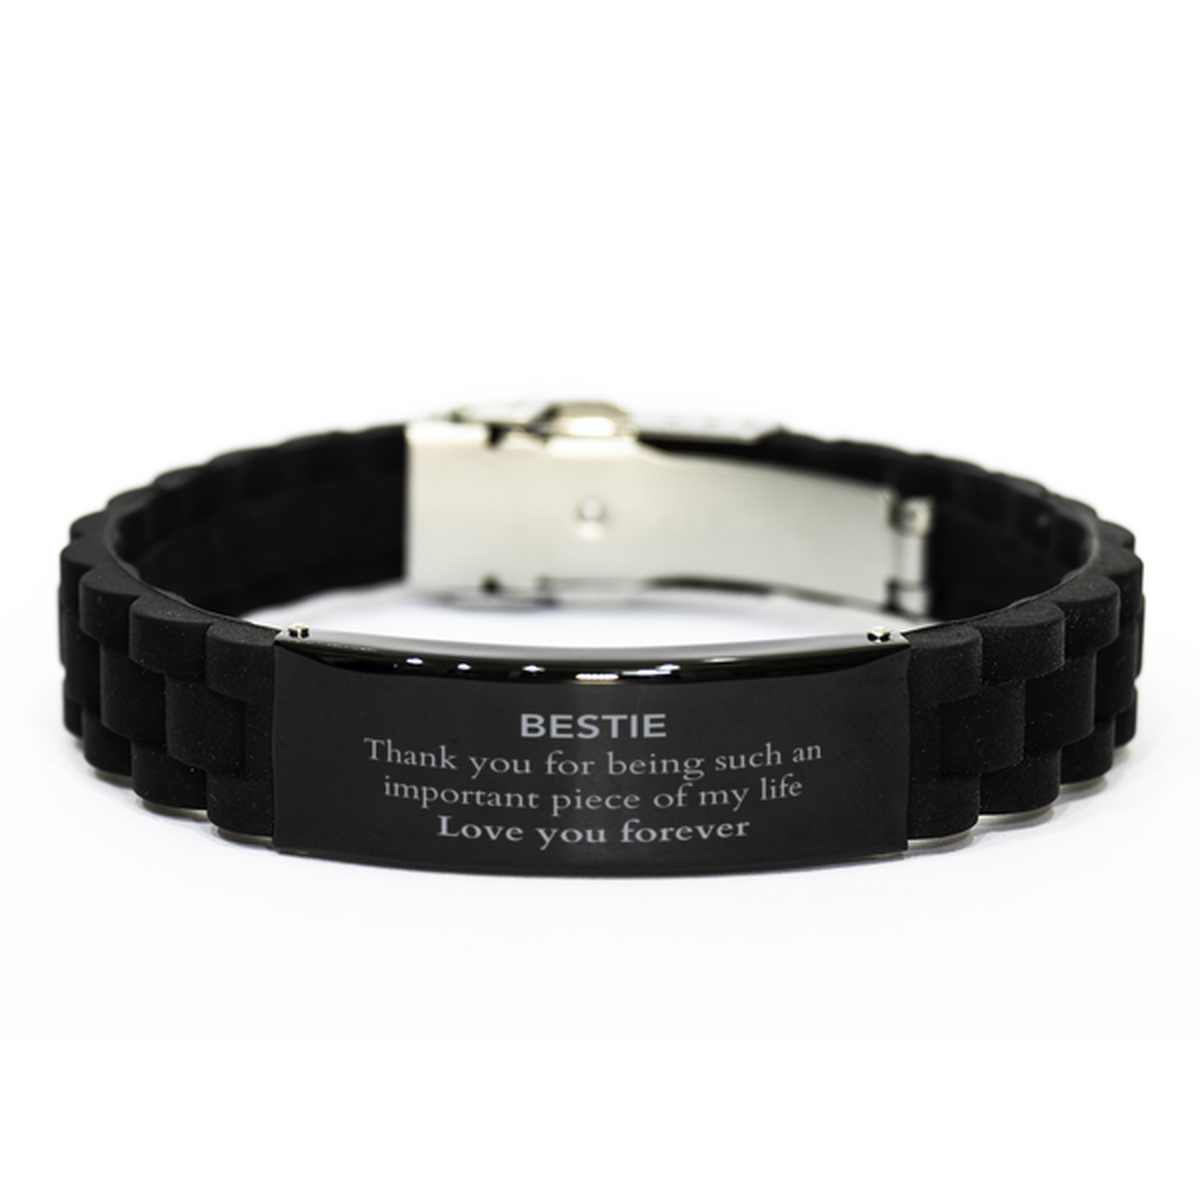 Appropriate Bestie Black Glidelock Clasp Bracelet Epic Birthday Gifts for Bestie Thank you for being such an important piece of my life Bestie Christmas Mothers Fathers Day